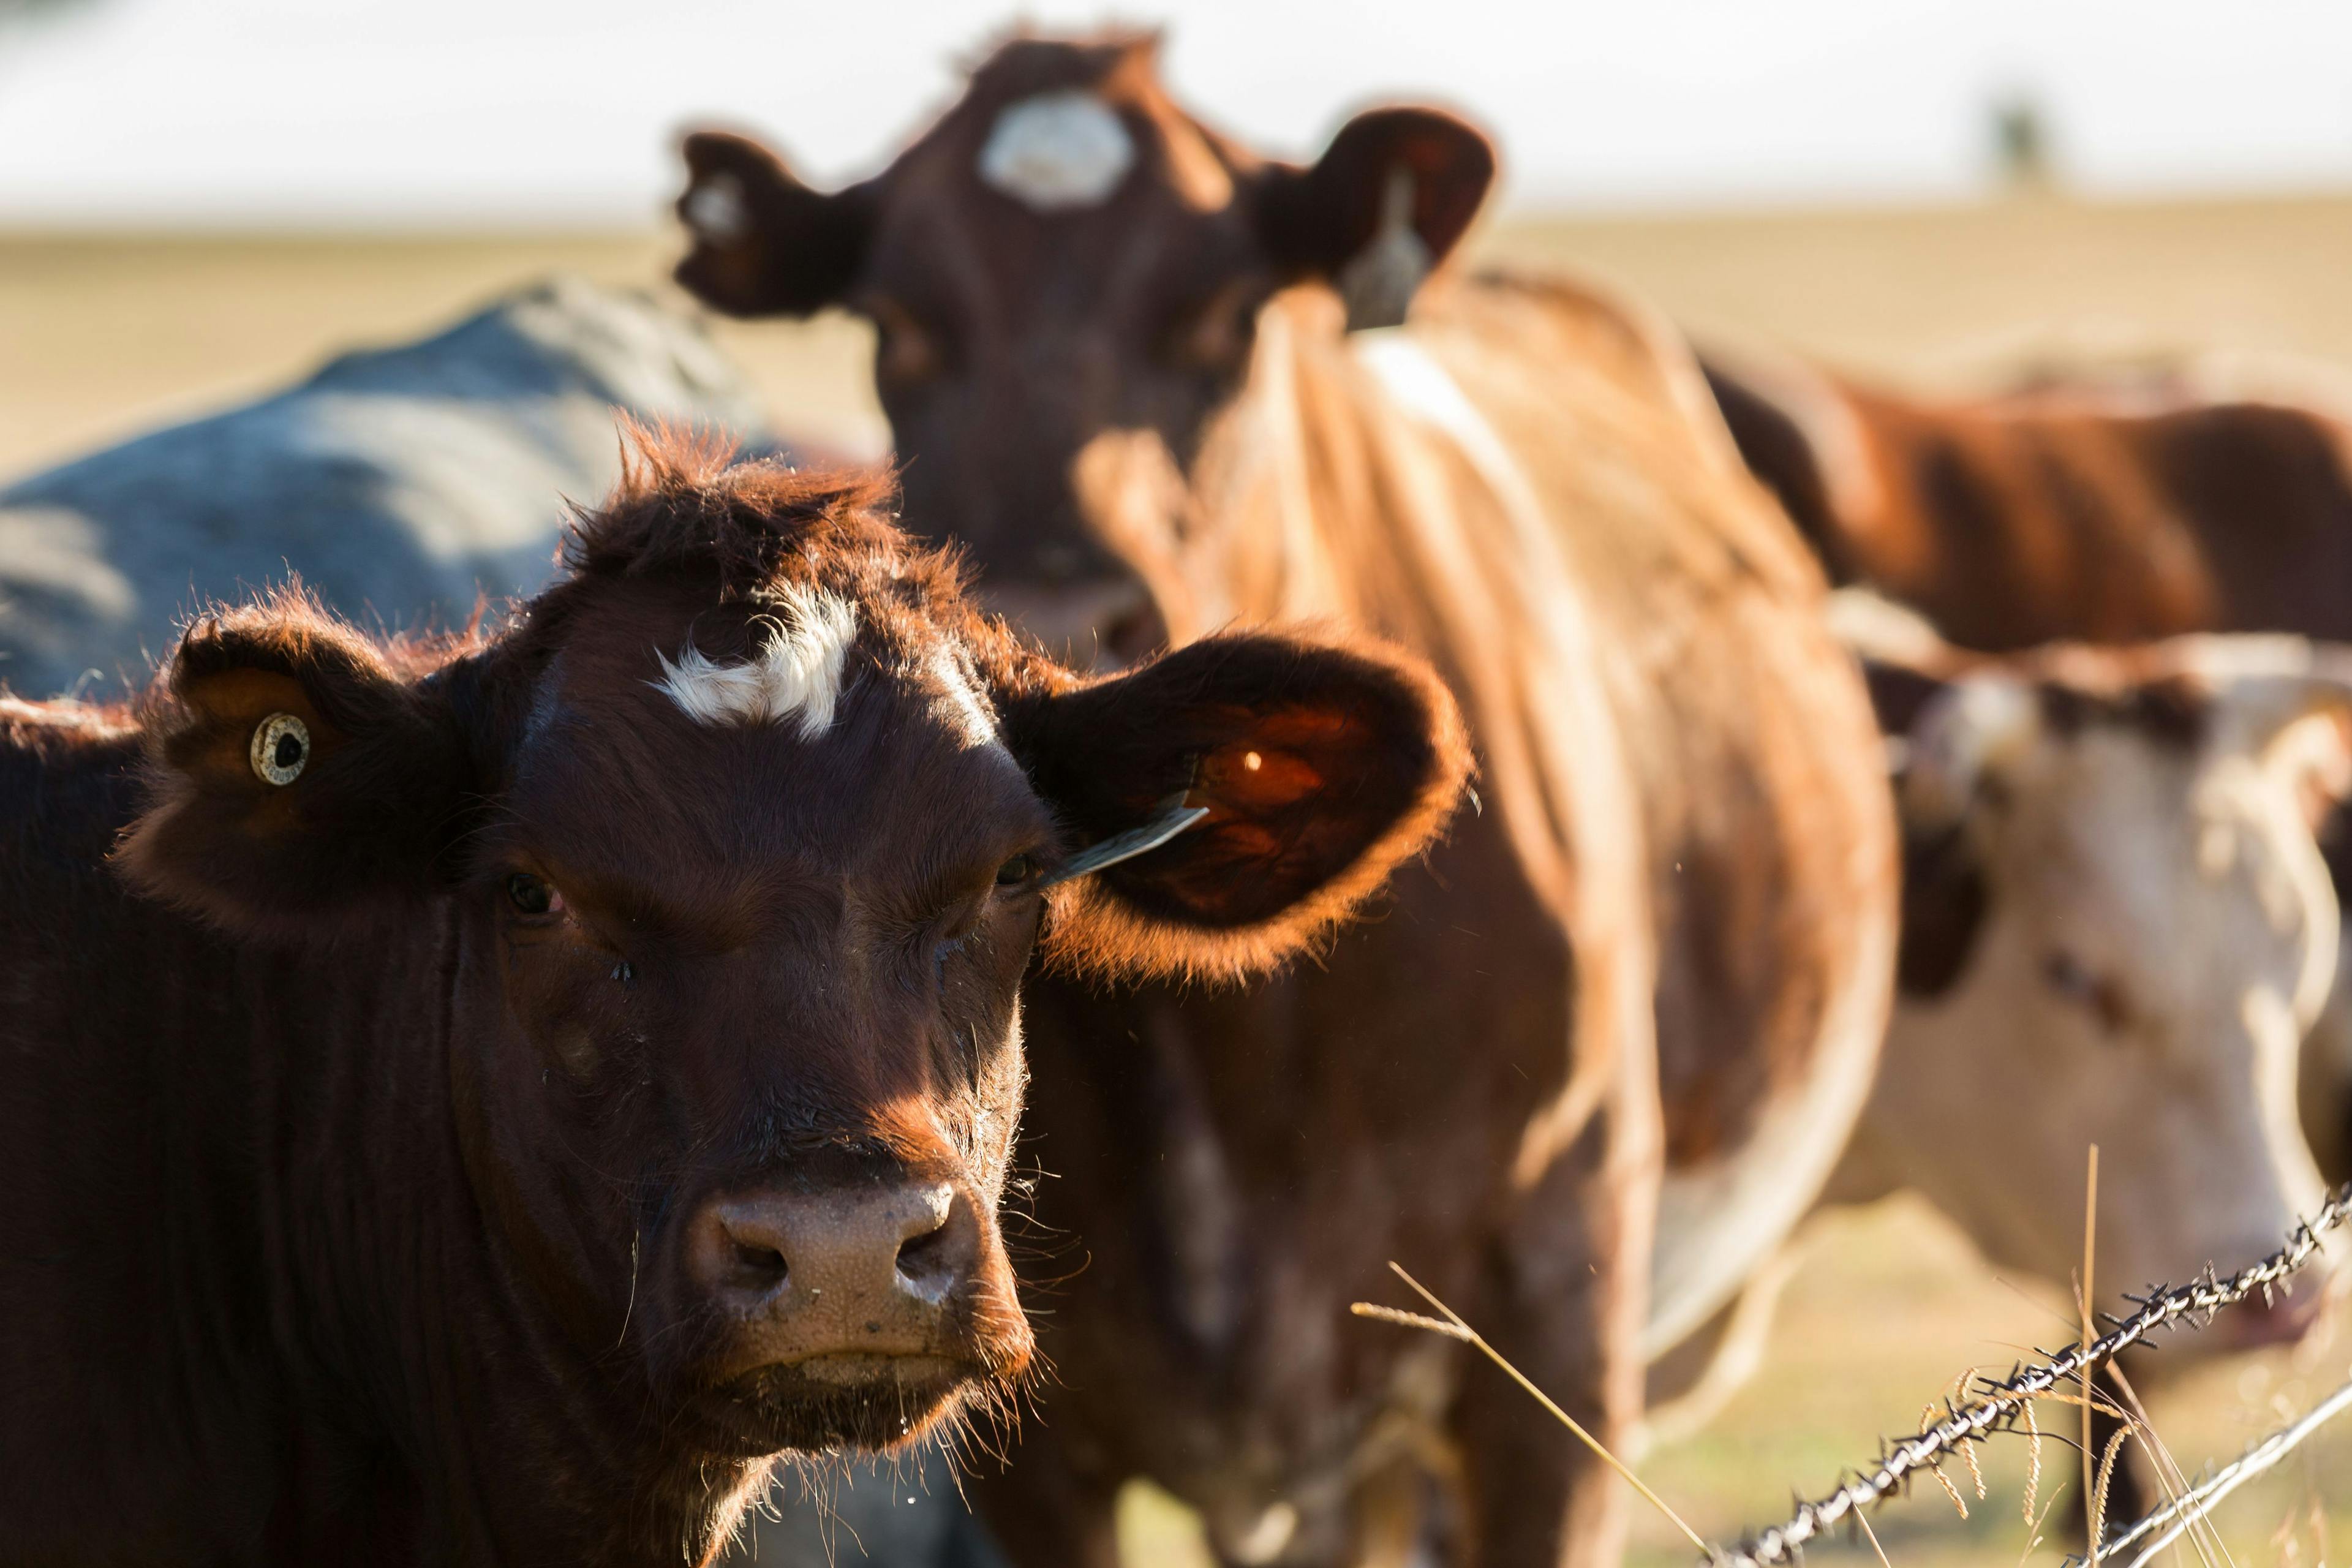 FDA approves first generic moxidectin injectable solution for cattle parasite treatment